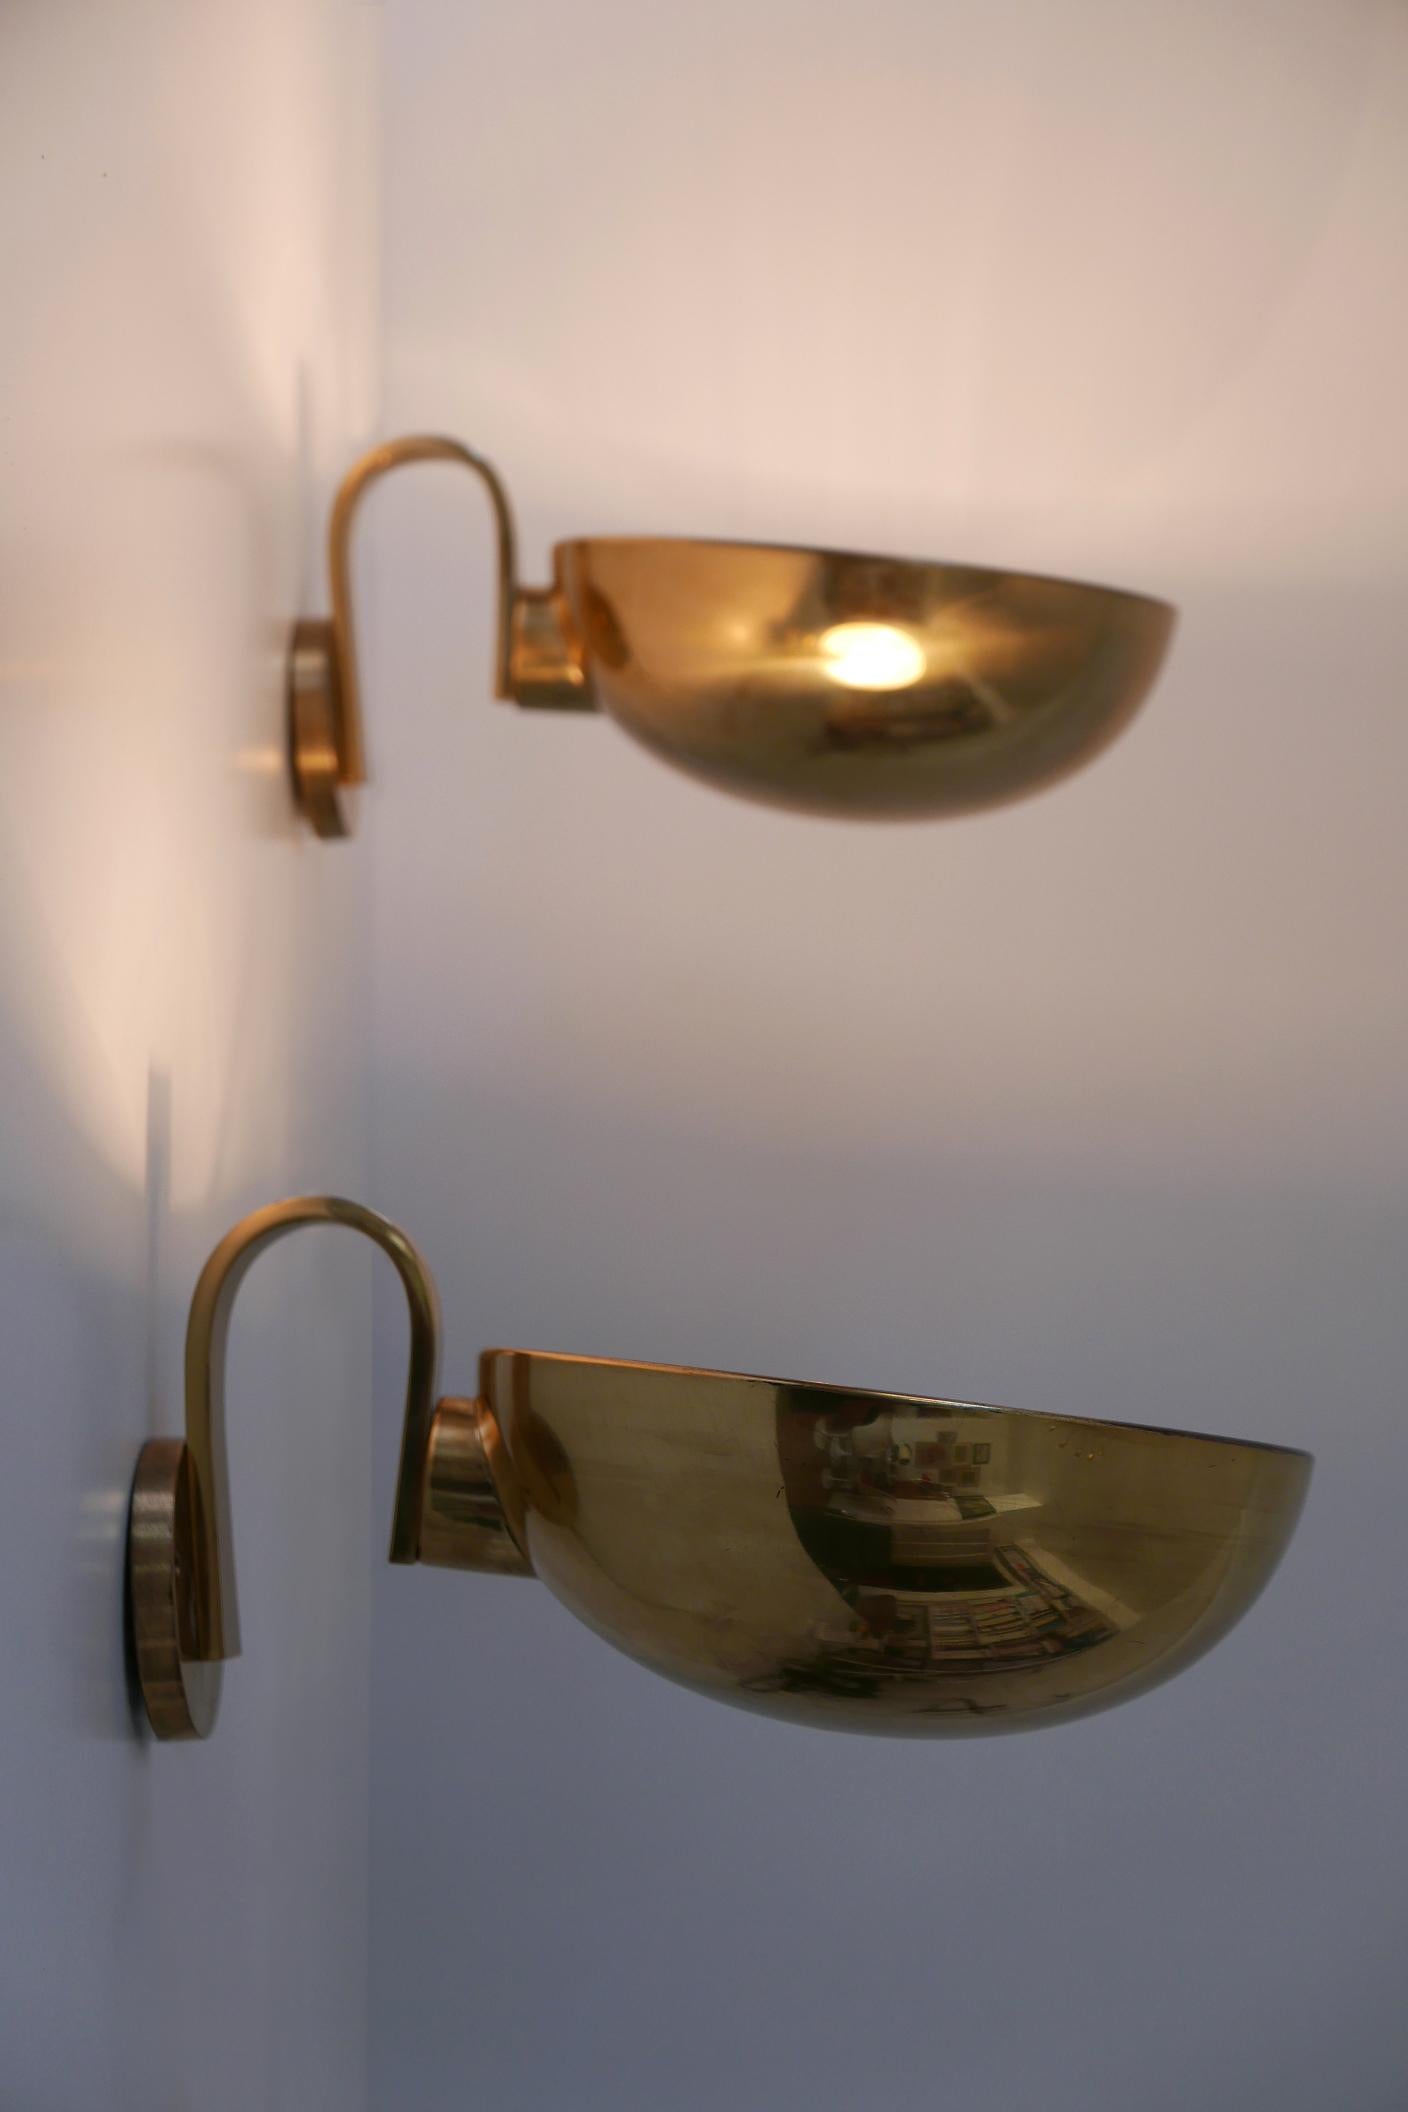 Set of two elegant Mid-Century Modern wall lamps or sconces. Designed and manufactured probably by Florian Schulz, 1970s, Germany. The lamp shades can be rotated.

Executed in brass sheet, each lamp comes with 1 x E27 Edison screw fit bulb holder,